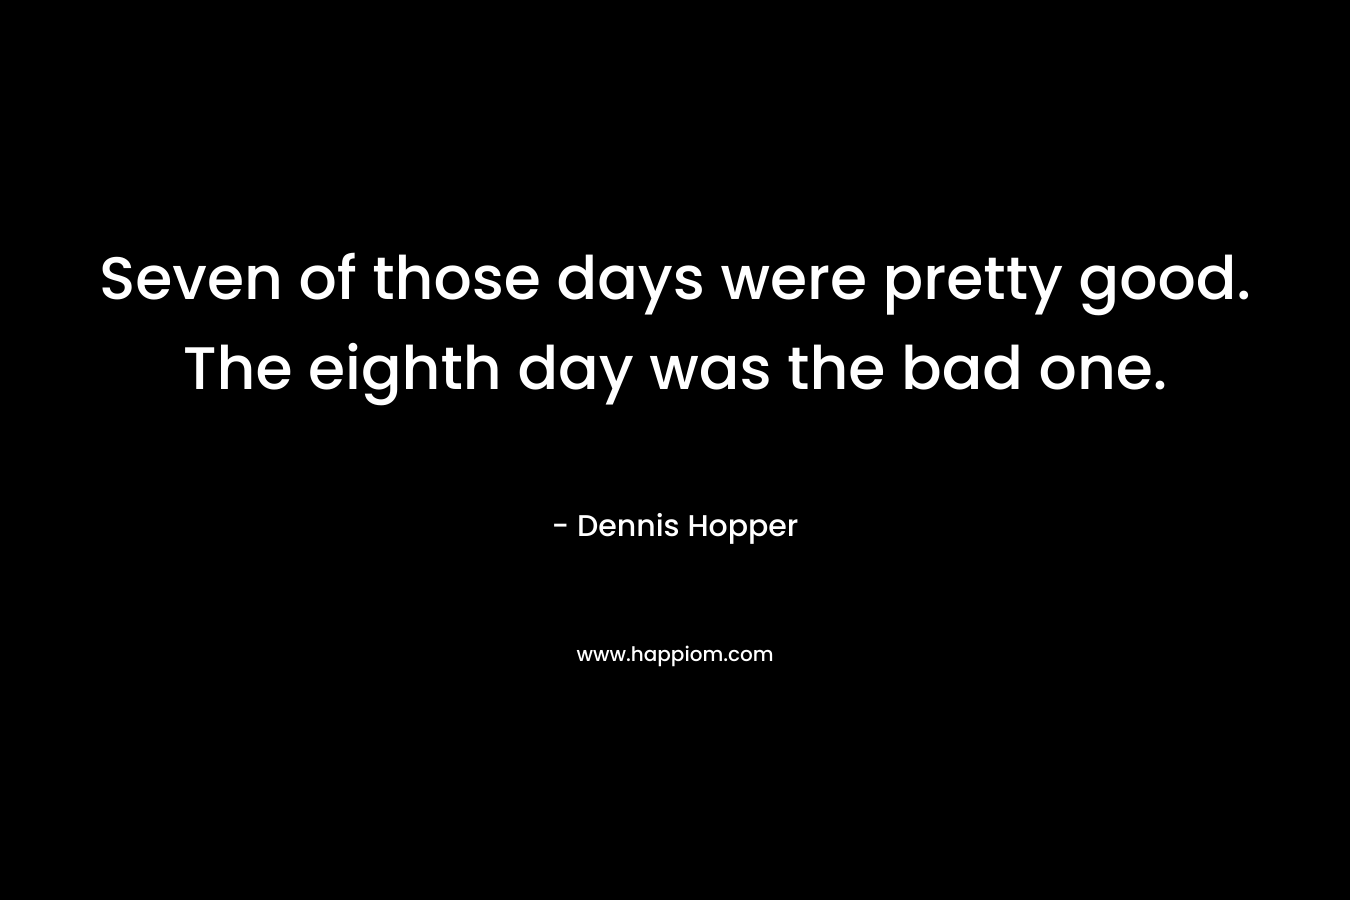 Seven of those days were pretty good. The eighth day was the bad one. – Dennis Hopper